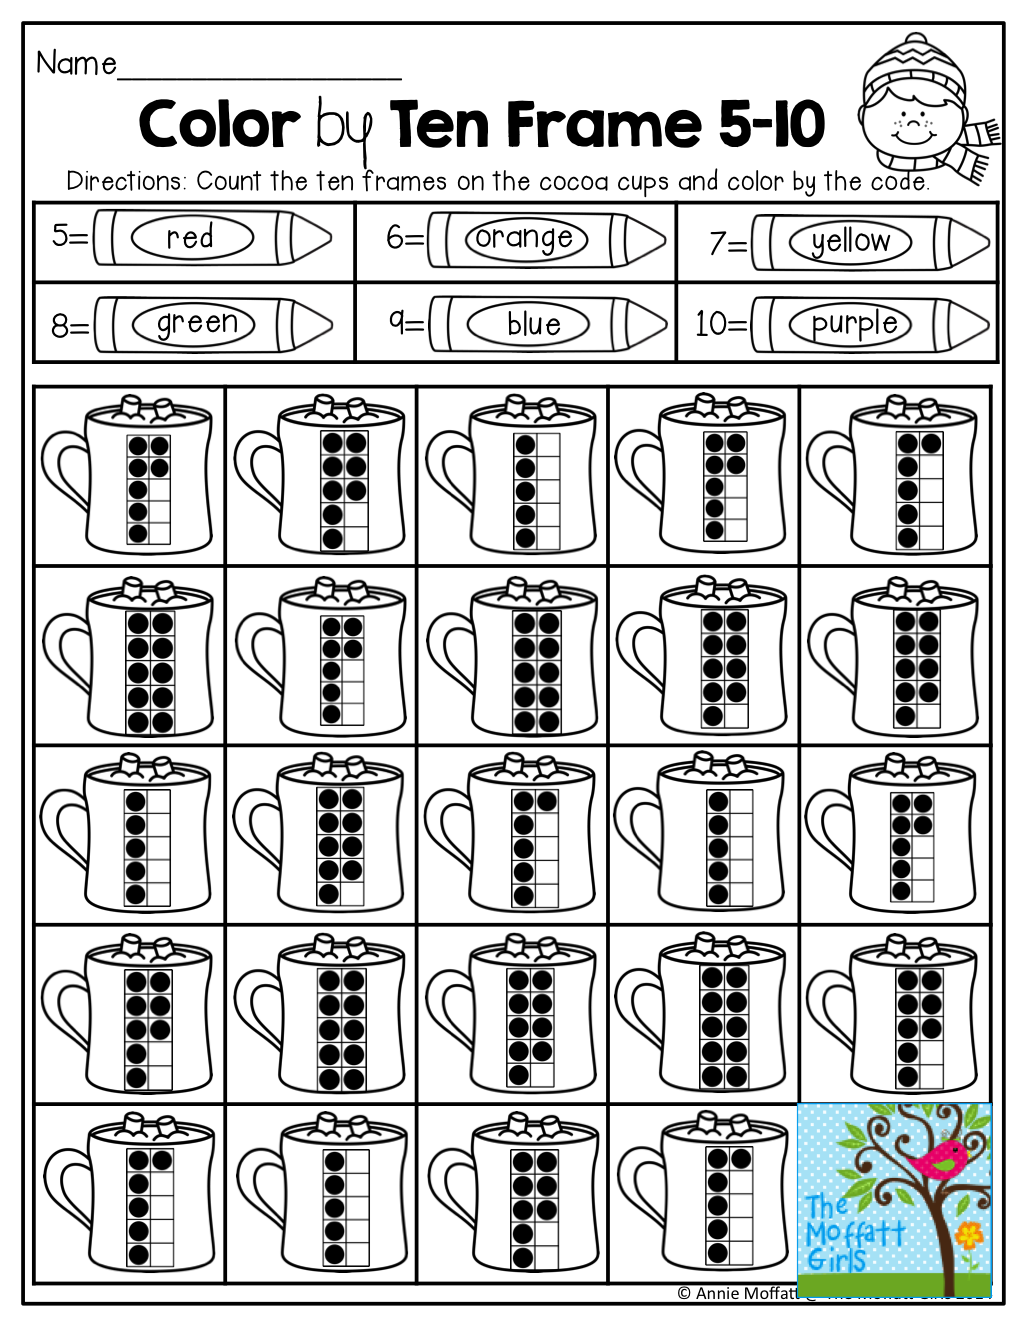 Ten frame recognition count the ten frames and color by the code tons of fun printables kindergarten math math math classroom